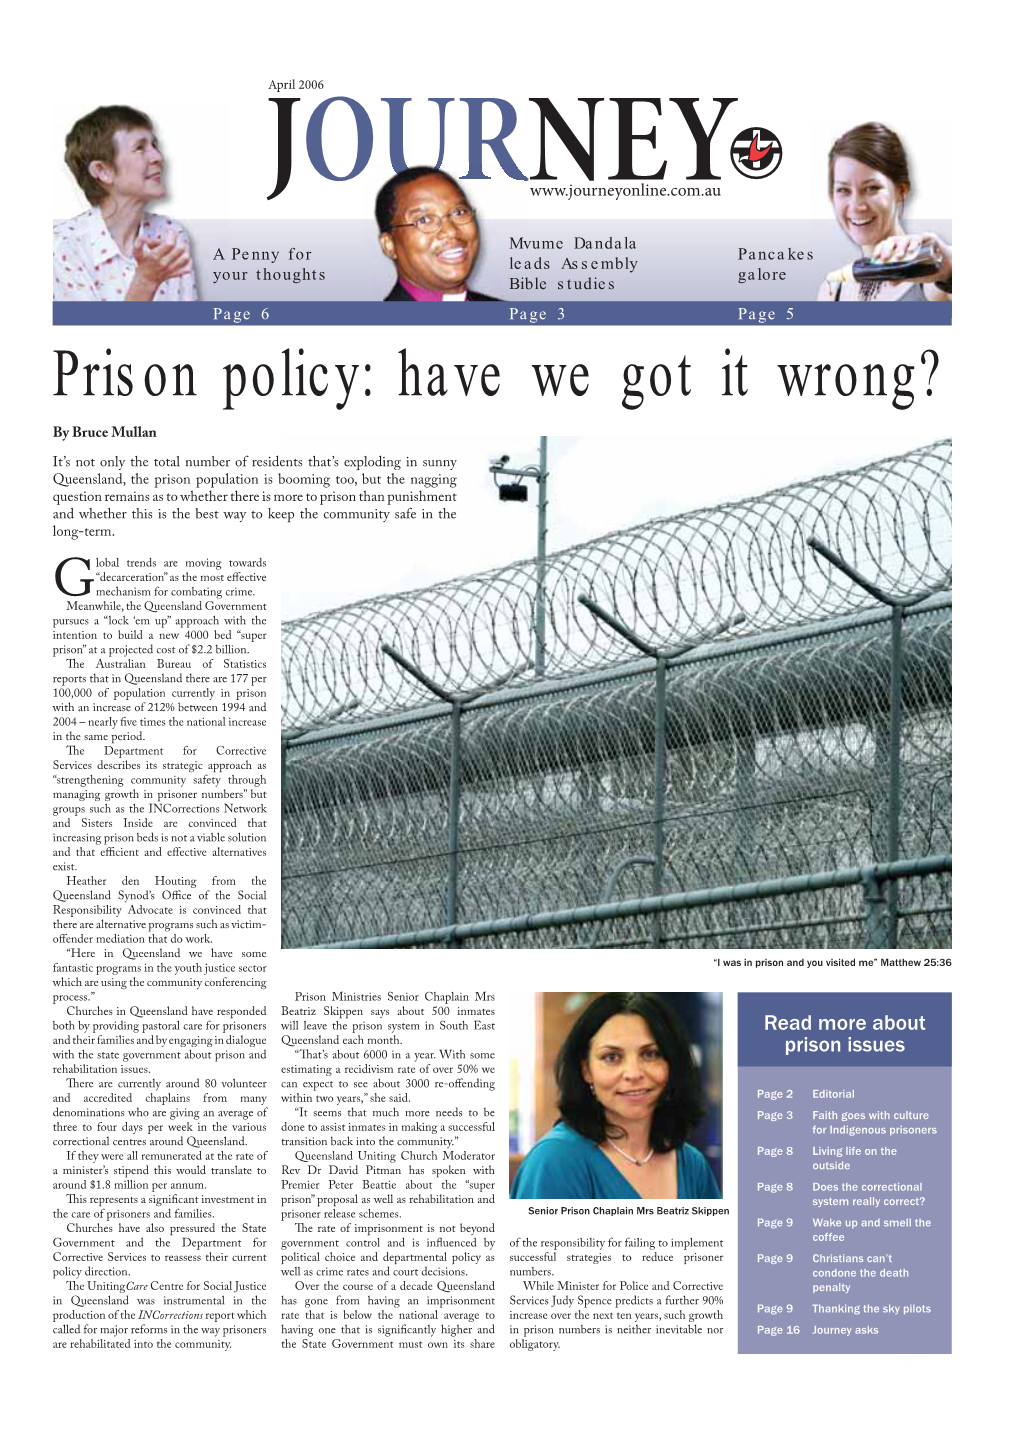 Prison Policy: Have We Got It Wrong?